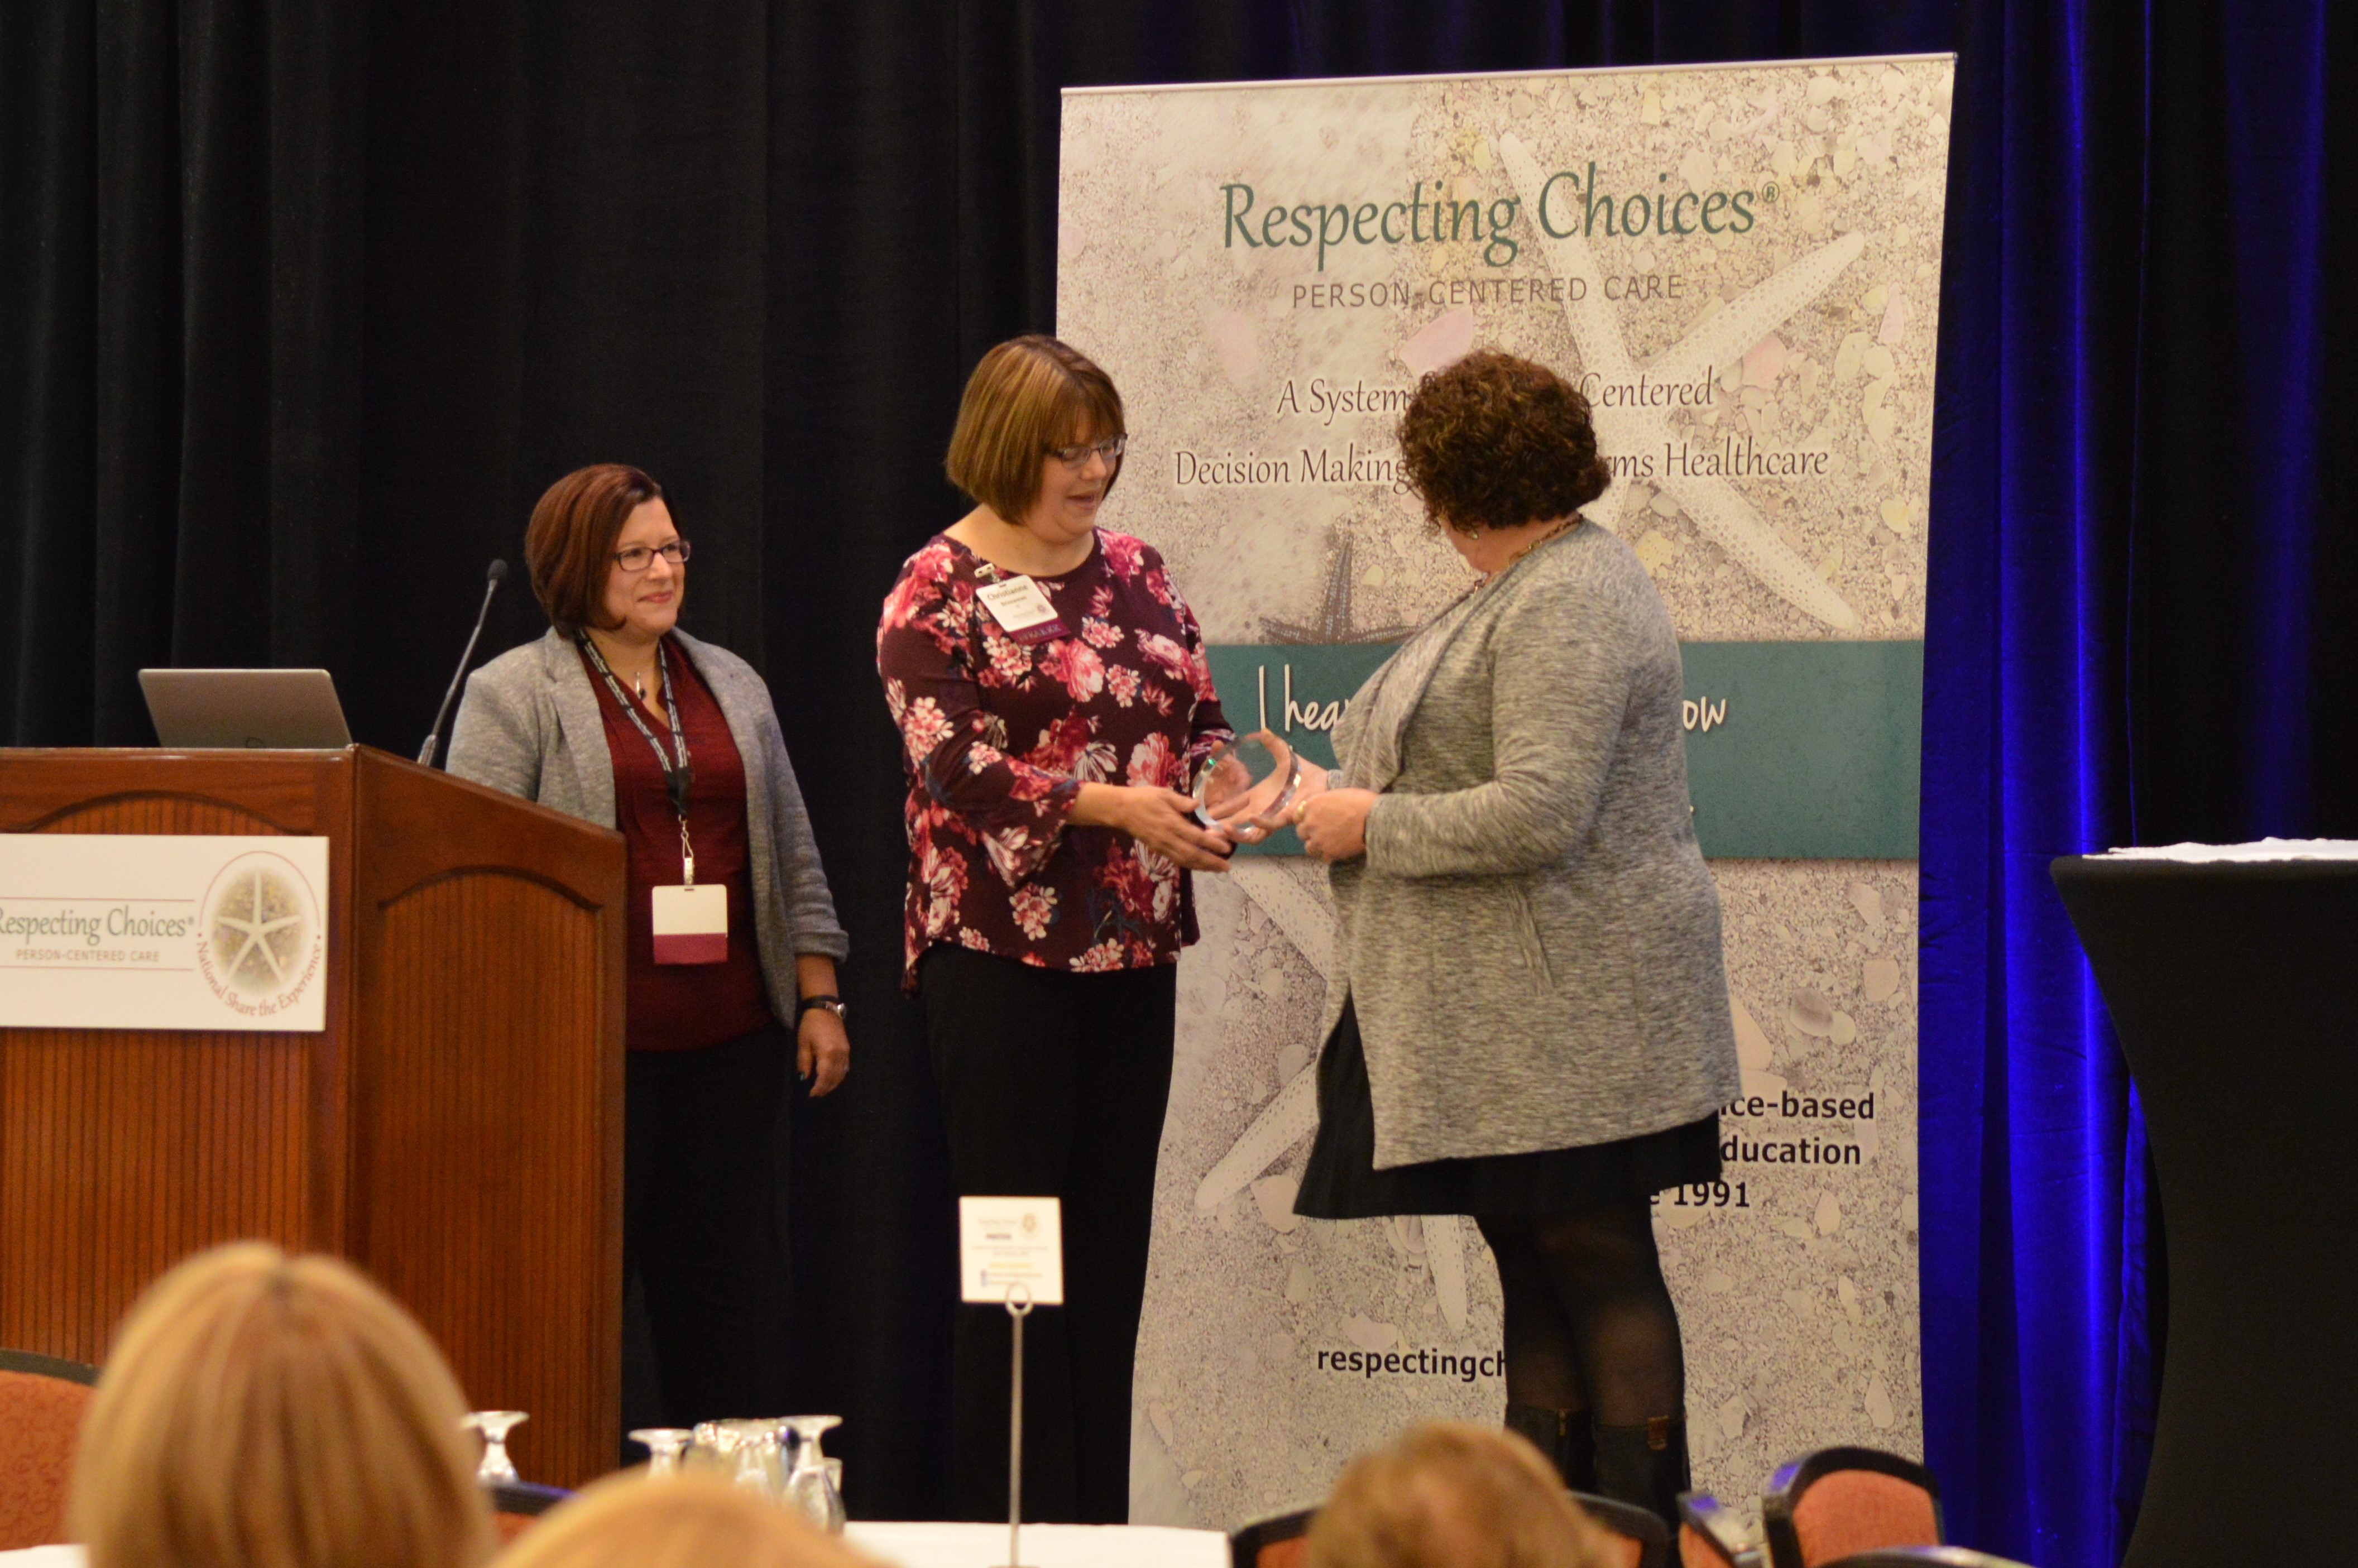 Excellence and Innovation in Interprofessional Communication (Honorable Mention) - Recipient: Parkview Health | Pictured L-R: Amy Spallinger, Chris Brinneman, Pat Tadel (RC)